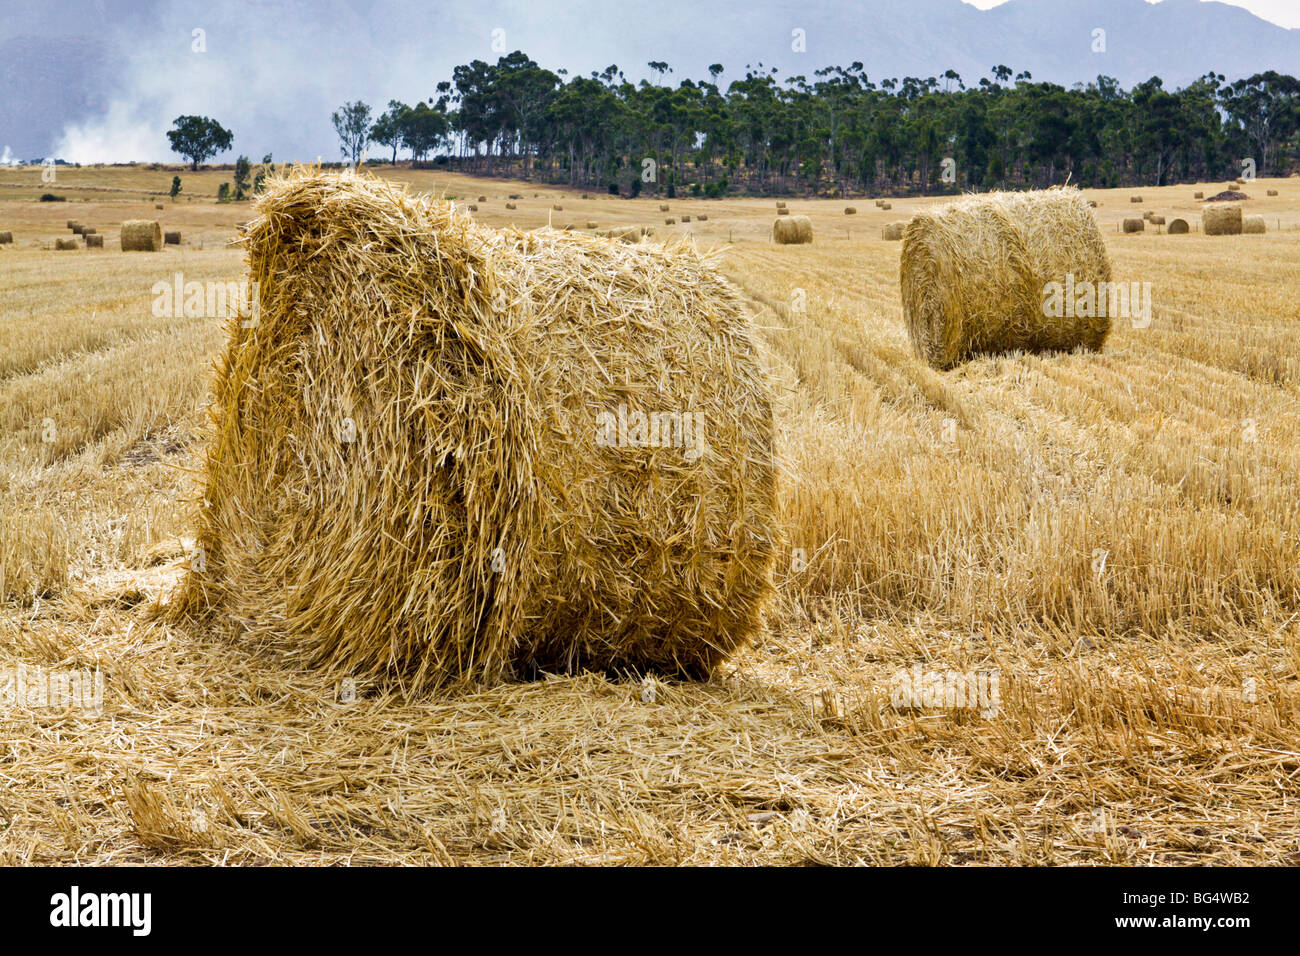 Bales of hay in a wheat field on a farm near Ceres, South Africa. Stock Photo